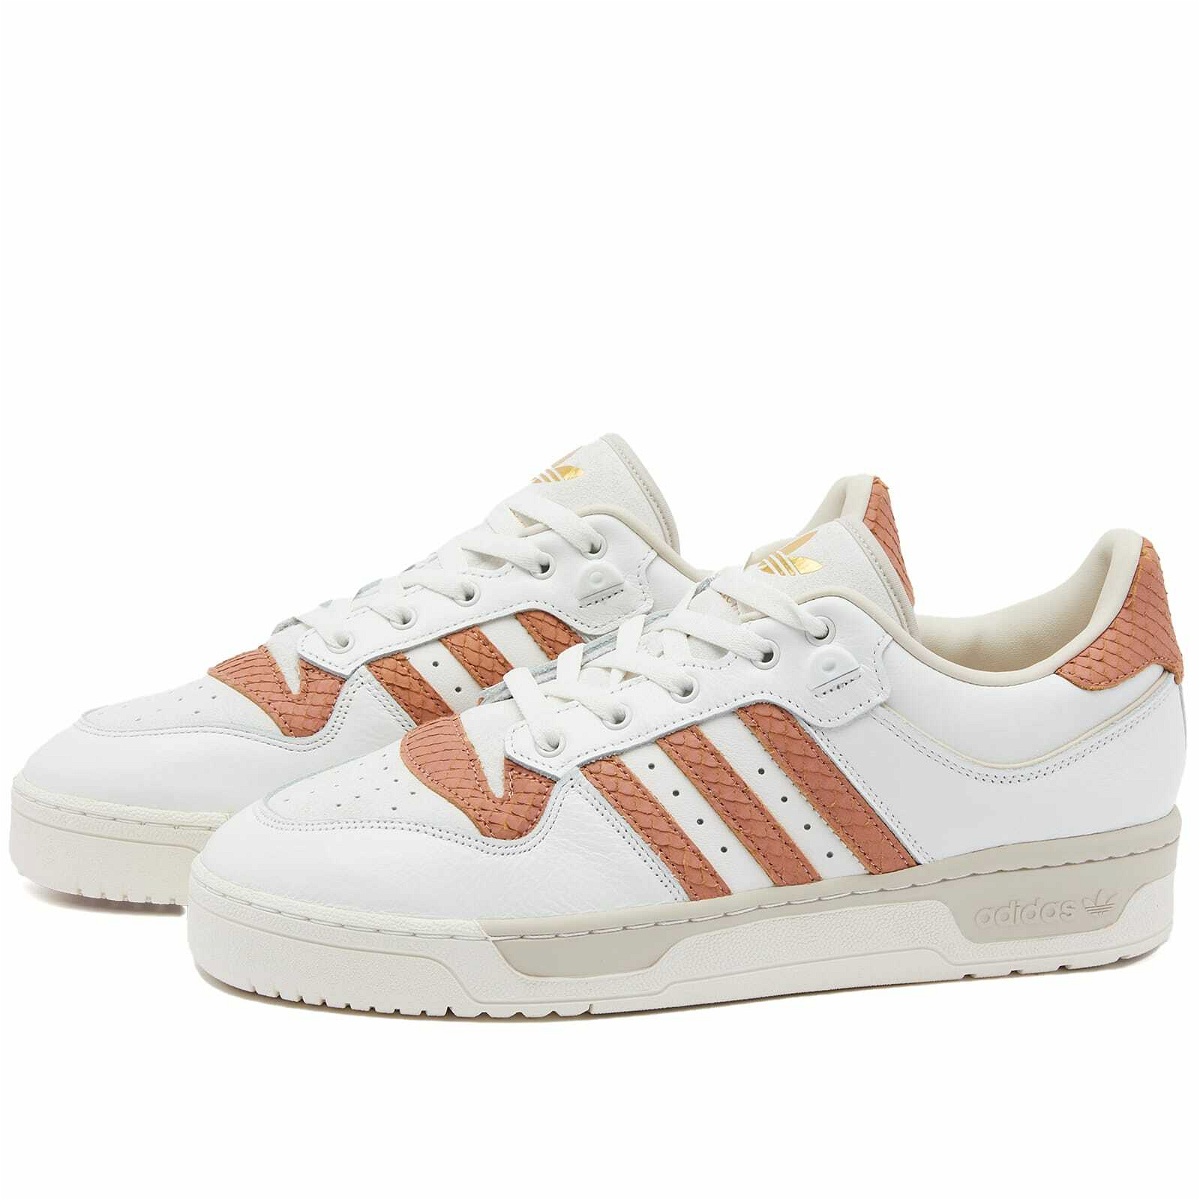 Adidas Rivalry Low 86 Sneakers adidas Strata White/Clay in Core